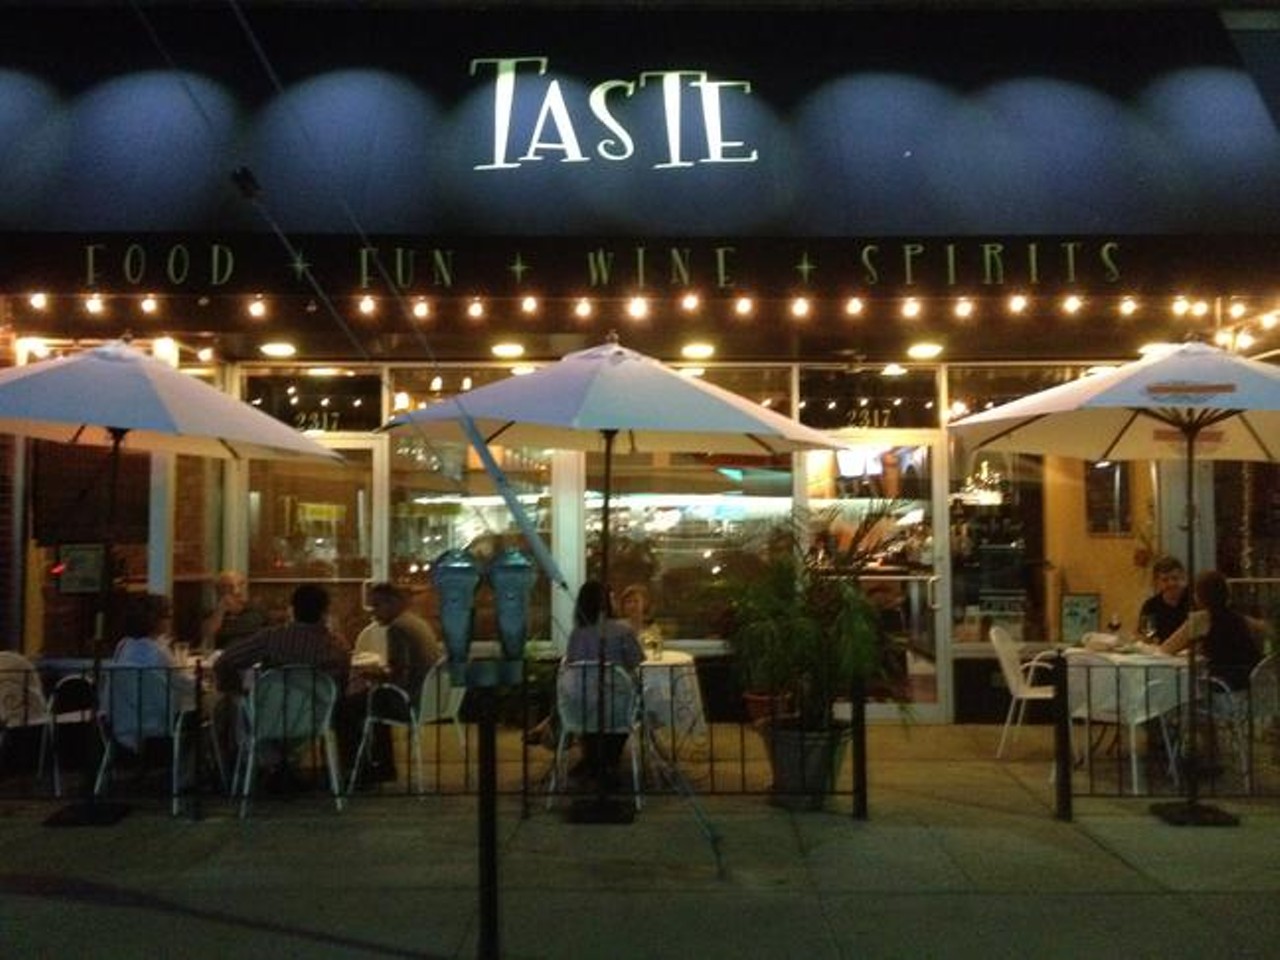 Taste
2317 Lee Rd., Cleveland Heights, (216) 932-9100 
It might fly under the radar, but this Cleveland Heights gem shouldn't. Serving upscale American bistro fare at eminently affordable prices, Taste will leave you stuffed after a trip to happy hour (Sunday through Friday 5 to 7 p.m. and Saturdays from 5 to 6 p.m.). Dive into a roasted shrimp piccata for $7, arancini di riso for $6, pizza du jour for $8 and truffle pommes frites for $5, among other options. Beer specials are $4, wine specials $5, and cocktail specials $6.
Photo via Taste